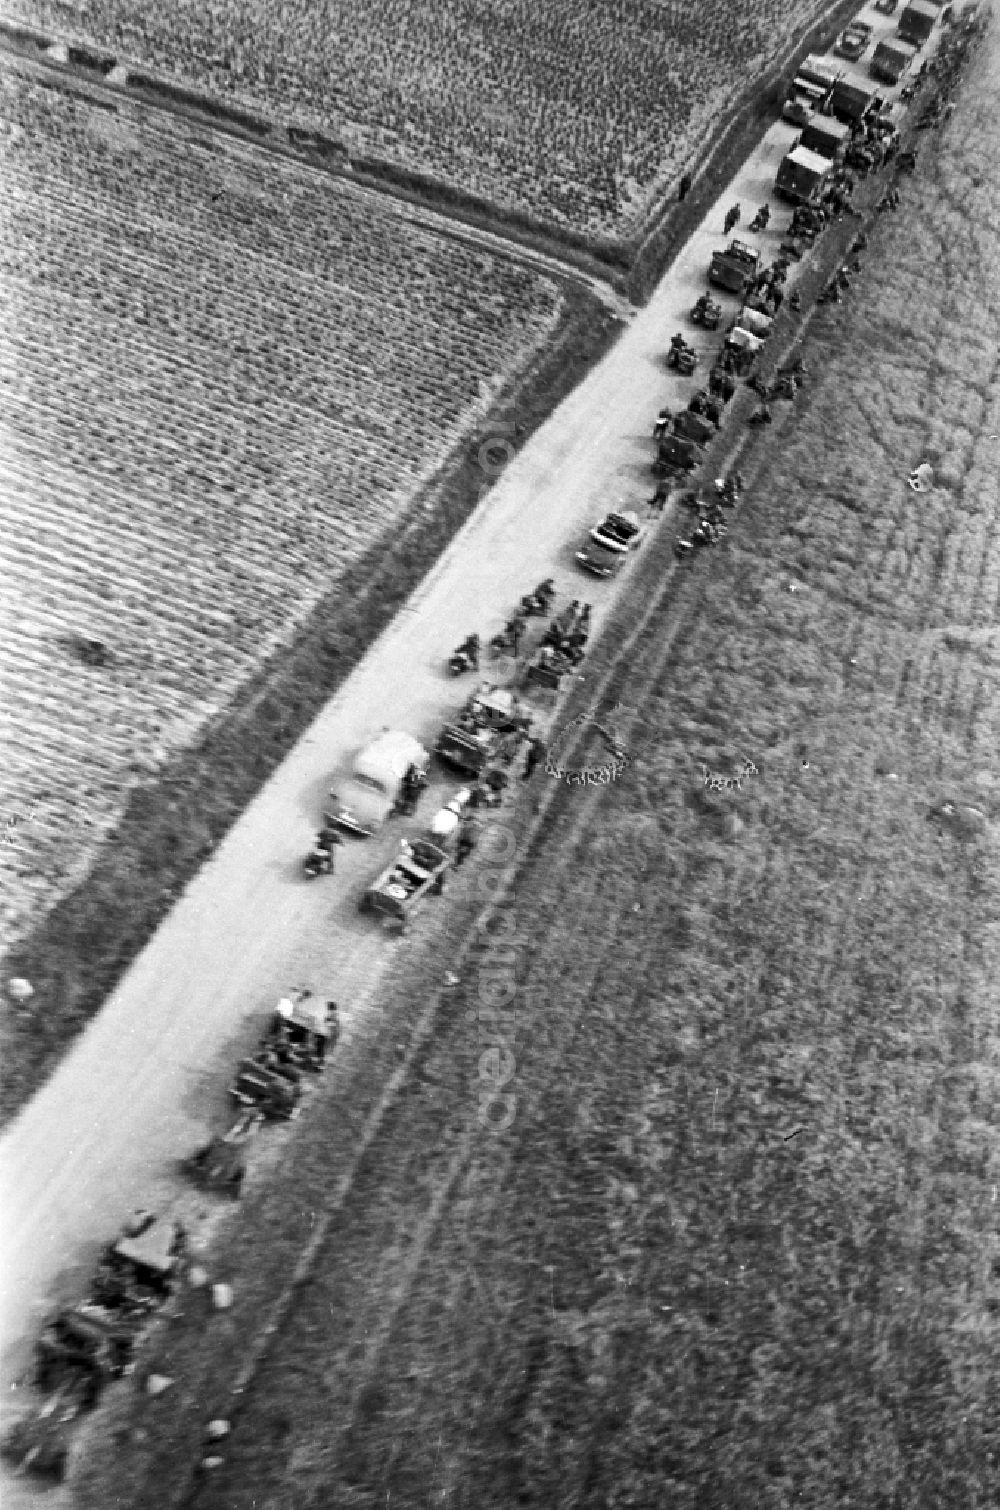 Aerial photograph Luhansk - Soldiers and army units with vehicles and armament equipmentgerman soldiers of the National Socialist Wehrmacht in a convoy on a country road in Luhansk Donezk in Ukraine